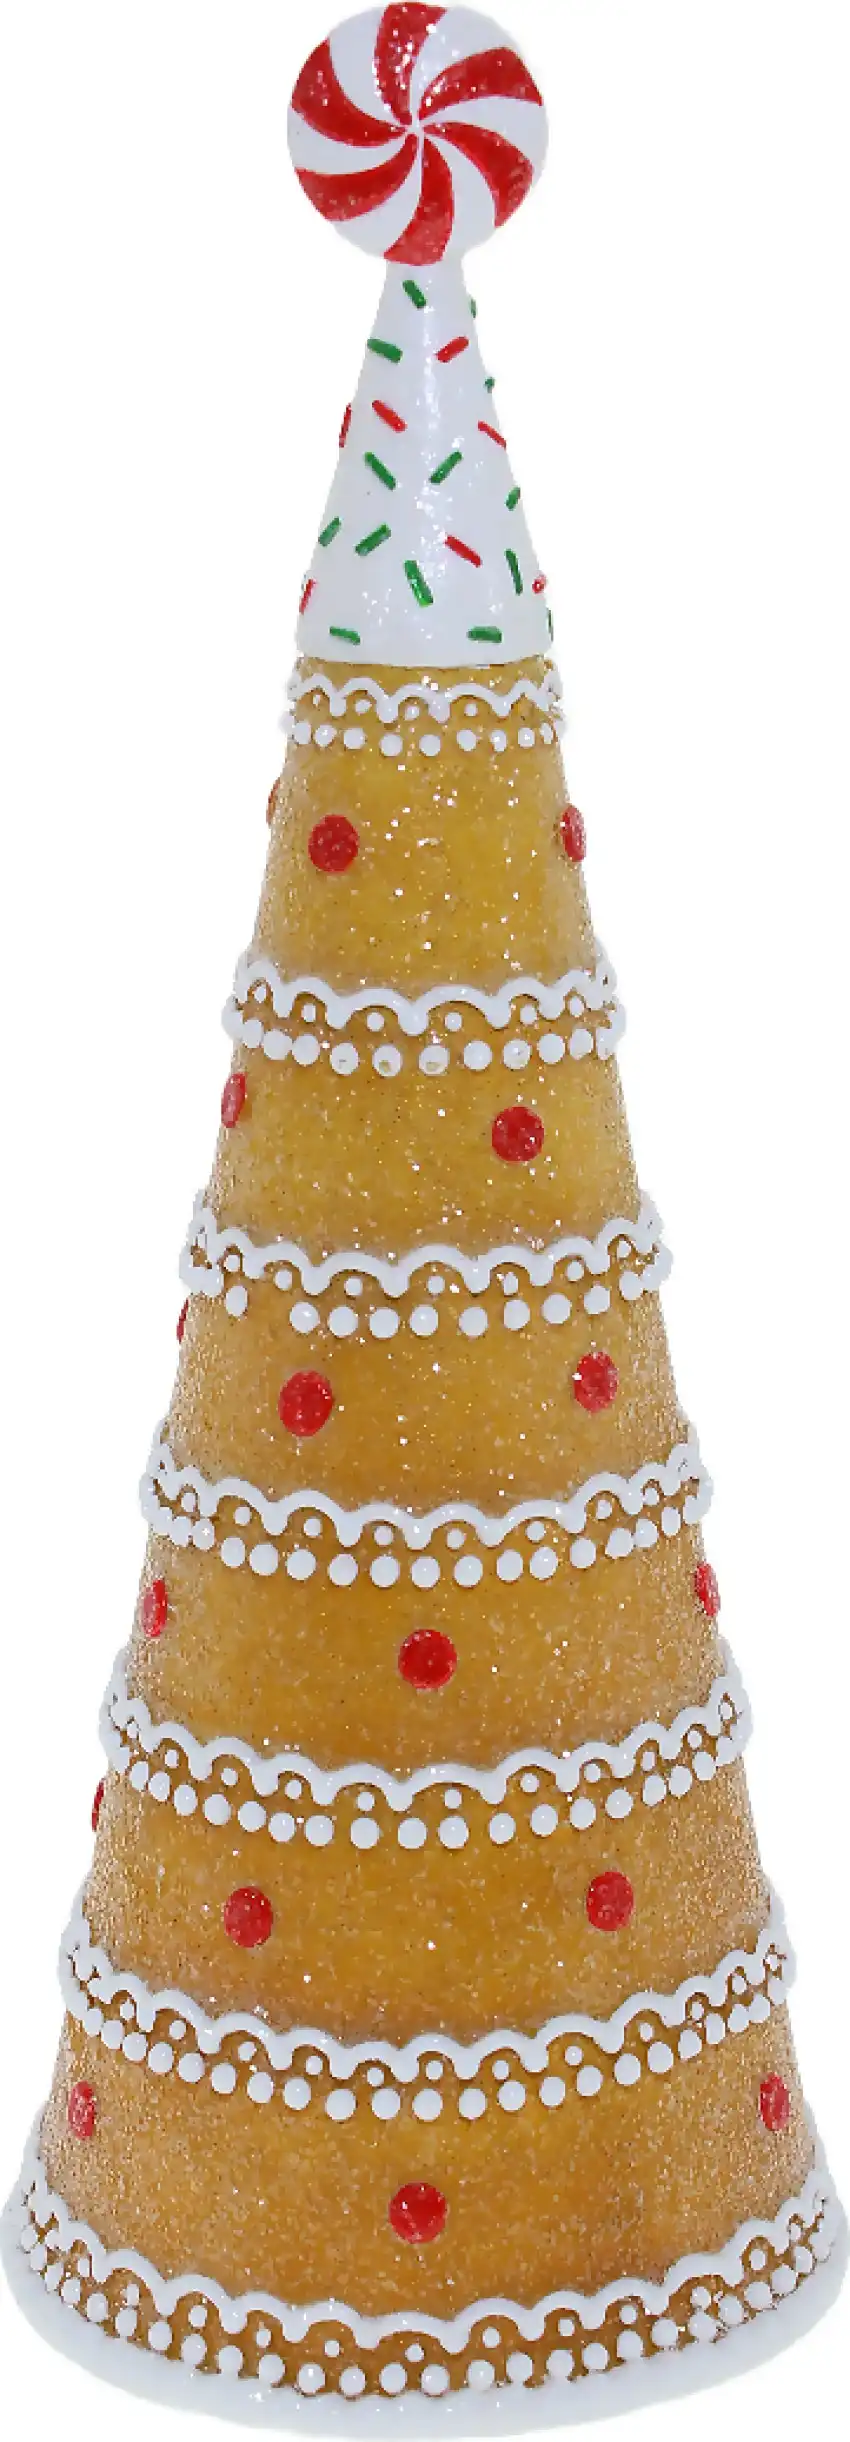 Cotton Candy - Xmas 30.5cm Candy Gingerbread Tree Ornament